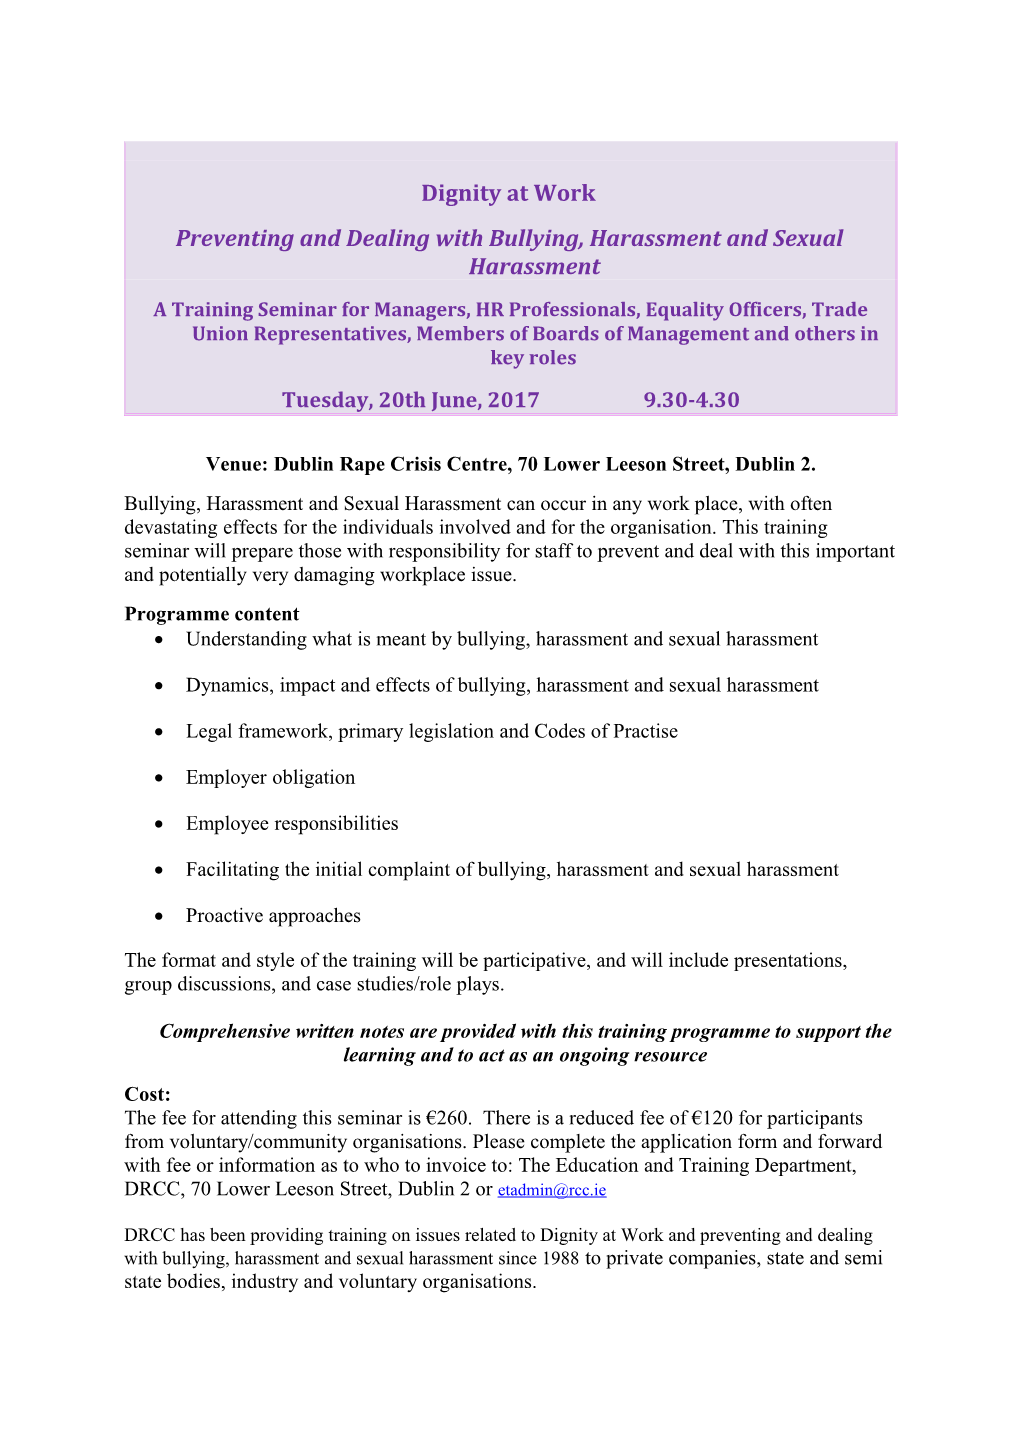 Preventing and Dealing with Bullying, Harassment and Sexual Harassment